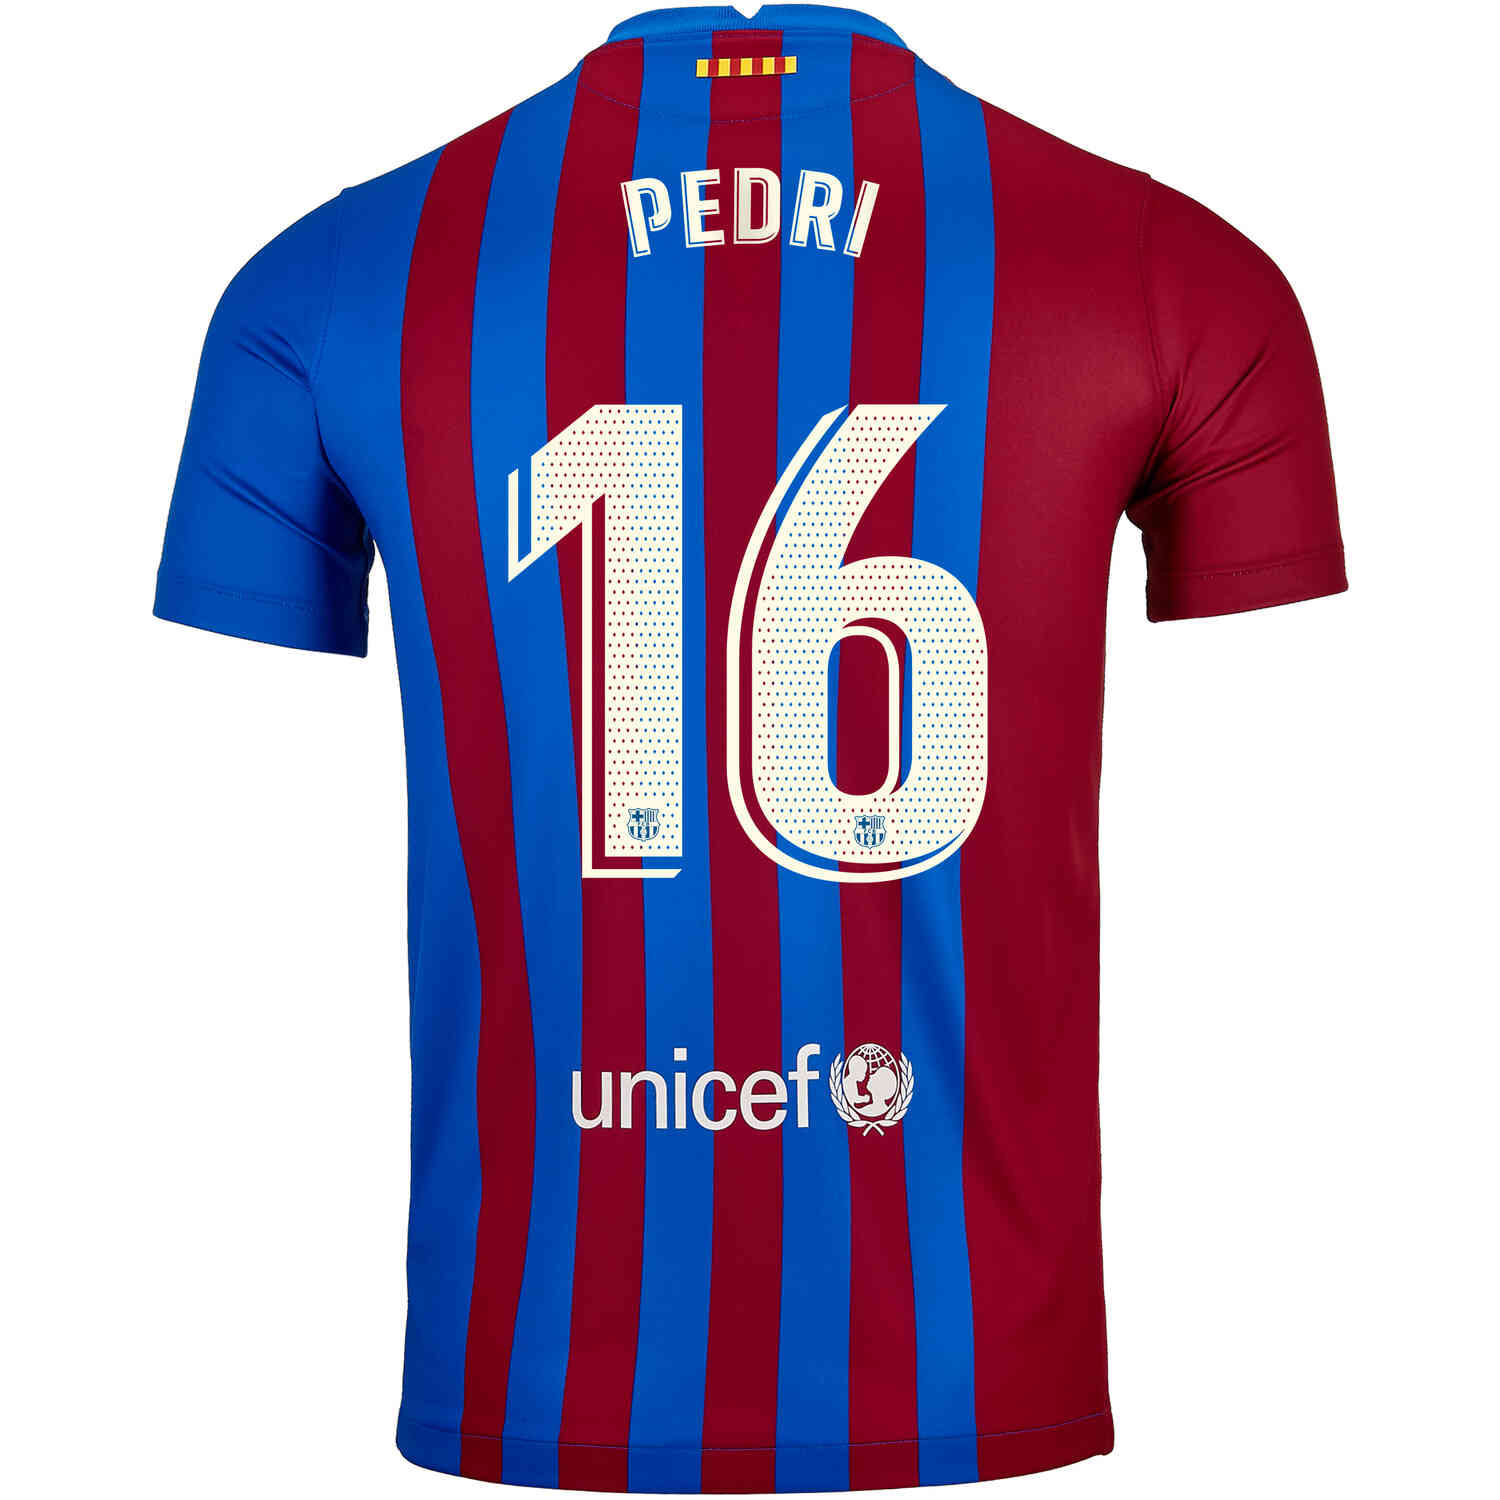 Number pedri jersey ReviewCable